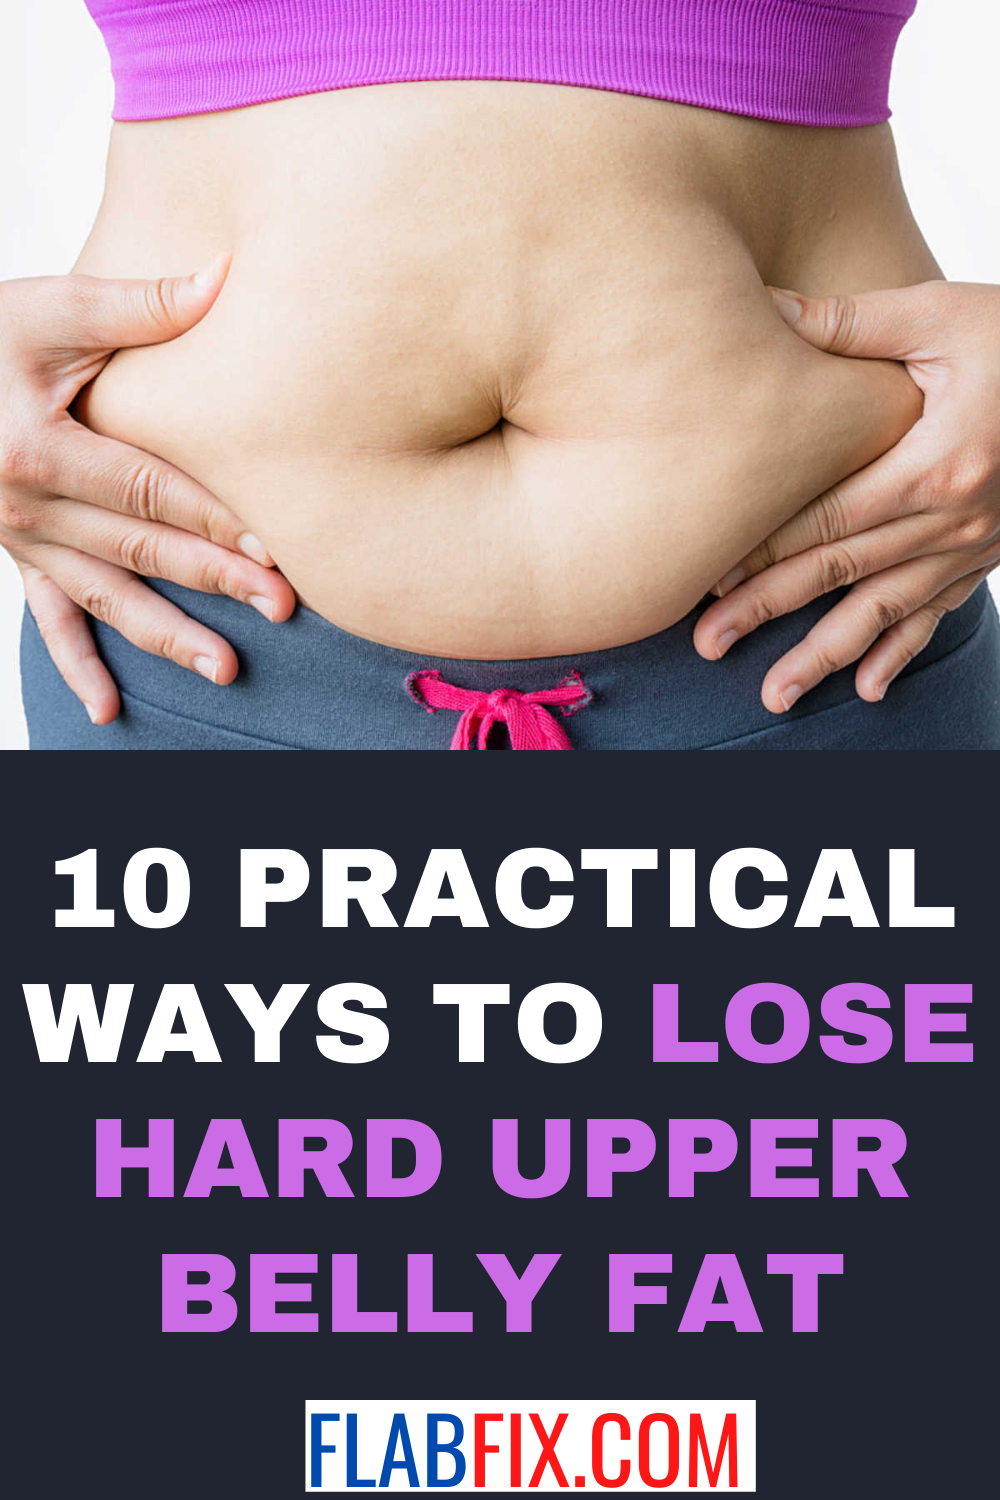 10 Practical Ways to Lose Hard Upper Belly Fat